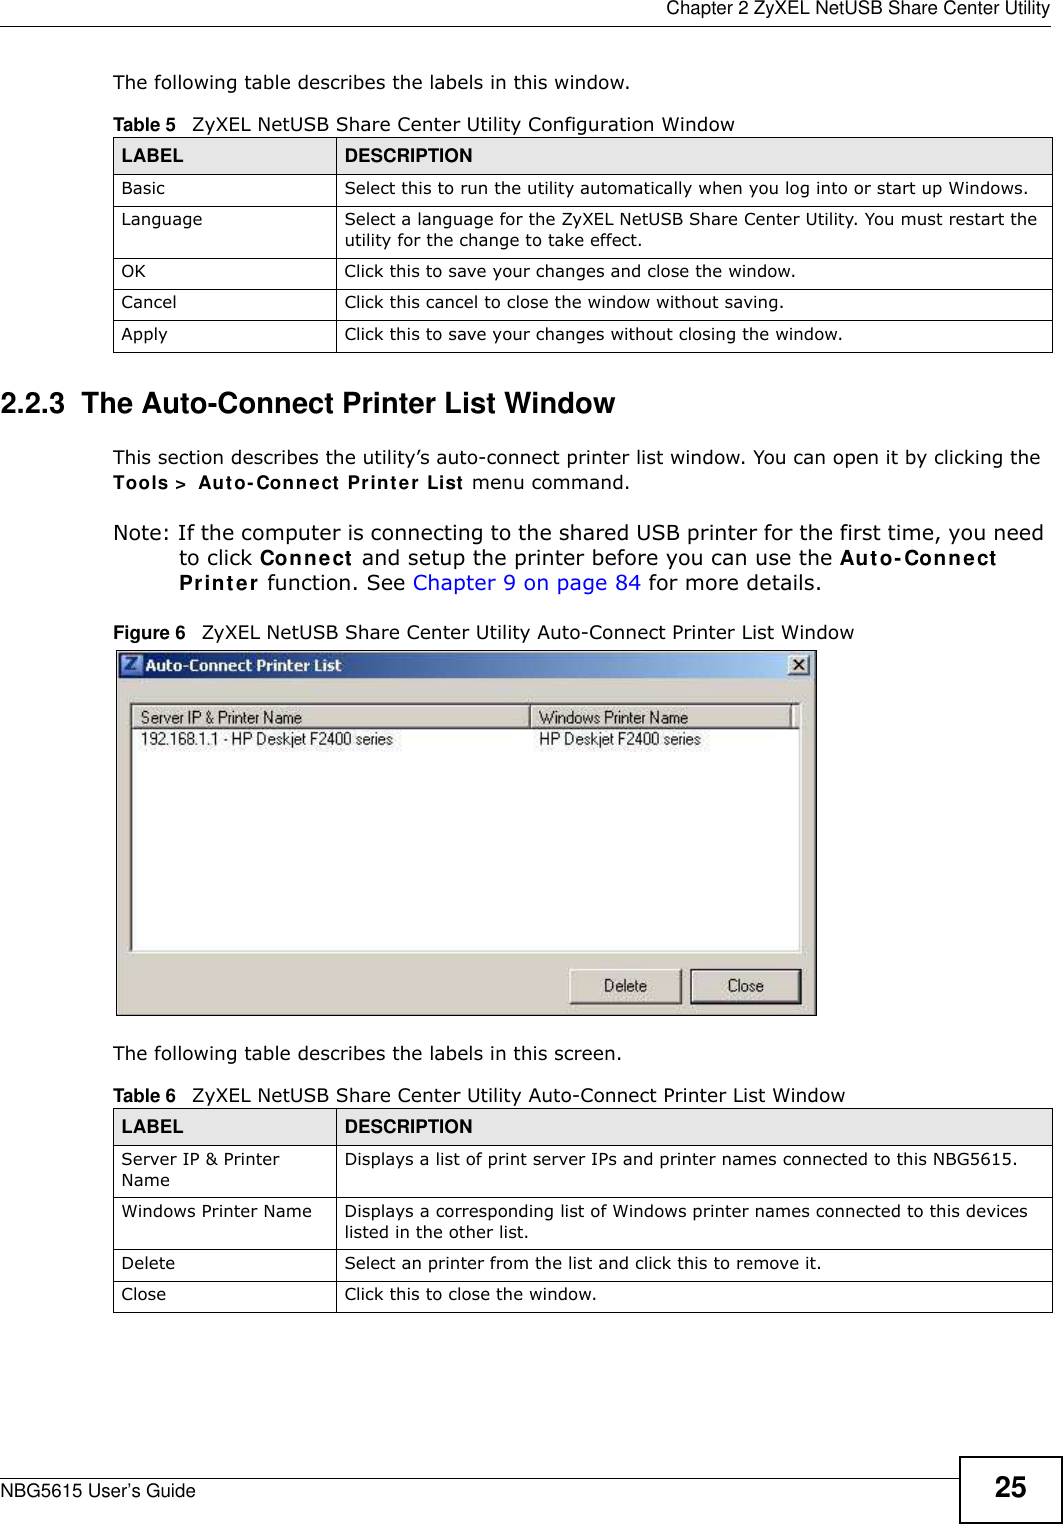  Chapter 2 ZyXEL NetUSB Share Center UtilityNBG5615 User’s Guide 25The following table describes the labels in this window.2.2.3  The Auto-Connect Printer List WindowThis section describes the utility’s auto-connect printer list window. You can open it by clicking the Tools &gt;  Auto- Connect Printer List menu command.Note: If the computer is connecting to the shared USB printer for the first time, you need to click Connect and setup the printer before you can use the Auto-Connect Printer function. See Chapter 9 on page 84 for more details. Figure 6   ZyXEL NetUSB Share Center Utility Auto-Connect Printer List WindowThe following table describes the labels in this screen.Table 5   ZyXEL NetUSB Share Center Utility Configuration WindowLABEL  DESCRIPTIONBasic Select this to run the utility automatically when you log into or start up Windows.Language Select a language for the ZyXEL NetUSB Share Center Utility. You must restart the utility for the change to take effect.OK Click this to save your changes and close the window.Cancel Click this cancel to close the window without saving.Apply Click this to save your changes without closing the window.Table 6   ZyXEL NetUSB Share Center Utility Auto-Connect Printer List WindowLABEL  DESCRIPTIONServer IP &amp; Printer NameDisplays a list of print server IPs and printer names connected to this NBG5615.Windows Printer Name Displays a corresponding list of Windows printer names connected to this devices listed in the other list.Delete Select an printer from the list and click this to remove it.Close Click this to close the window.